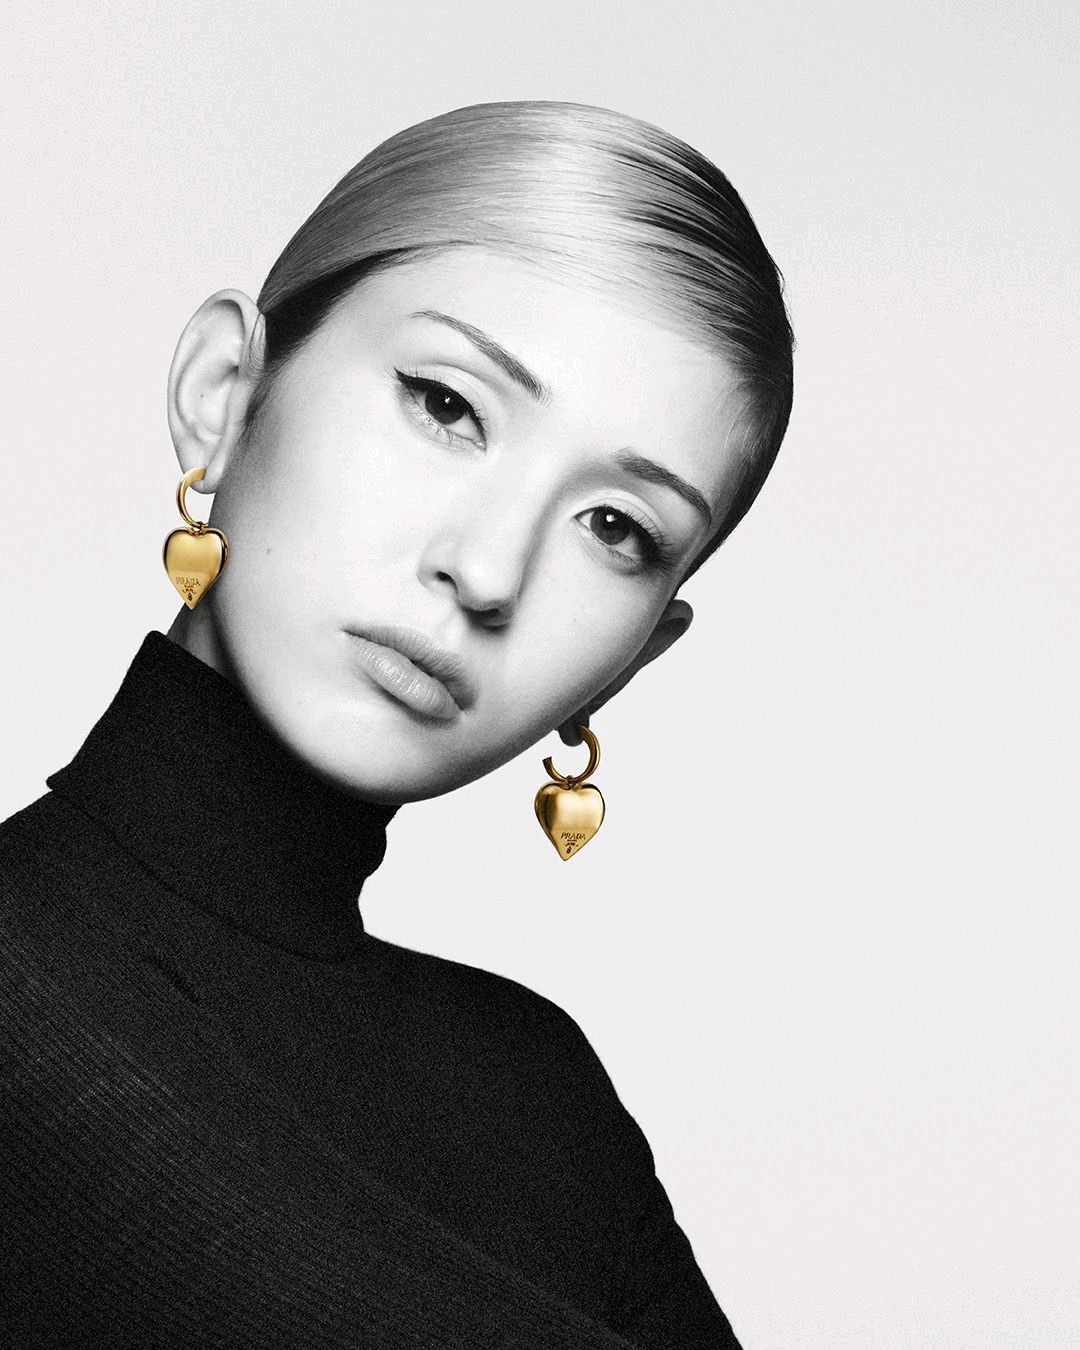 Prada Launches a 100% Recycled Gold Jewelry Collection